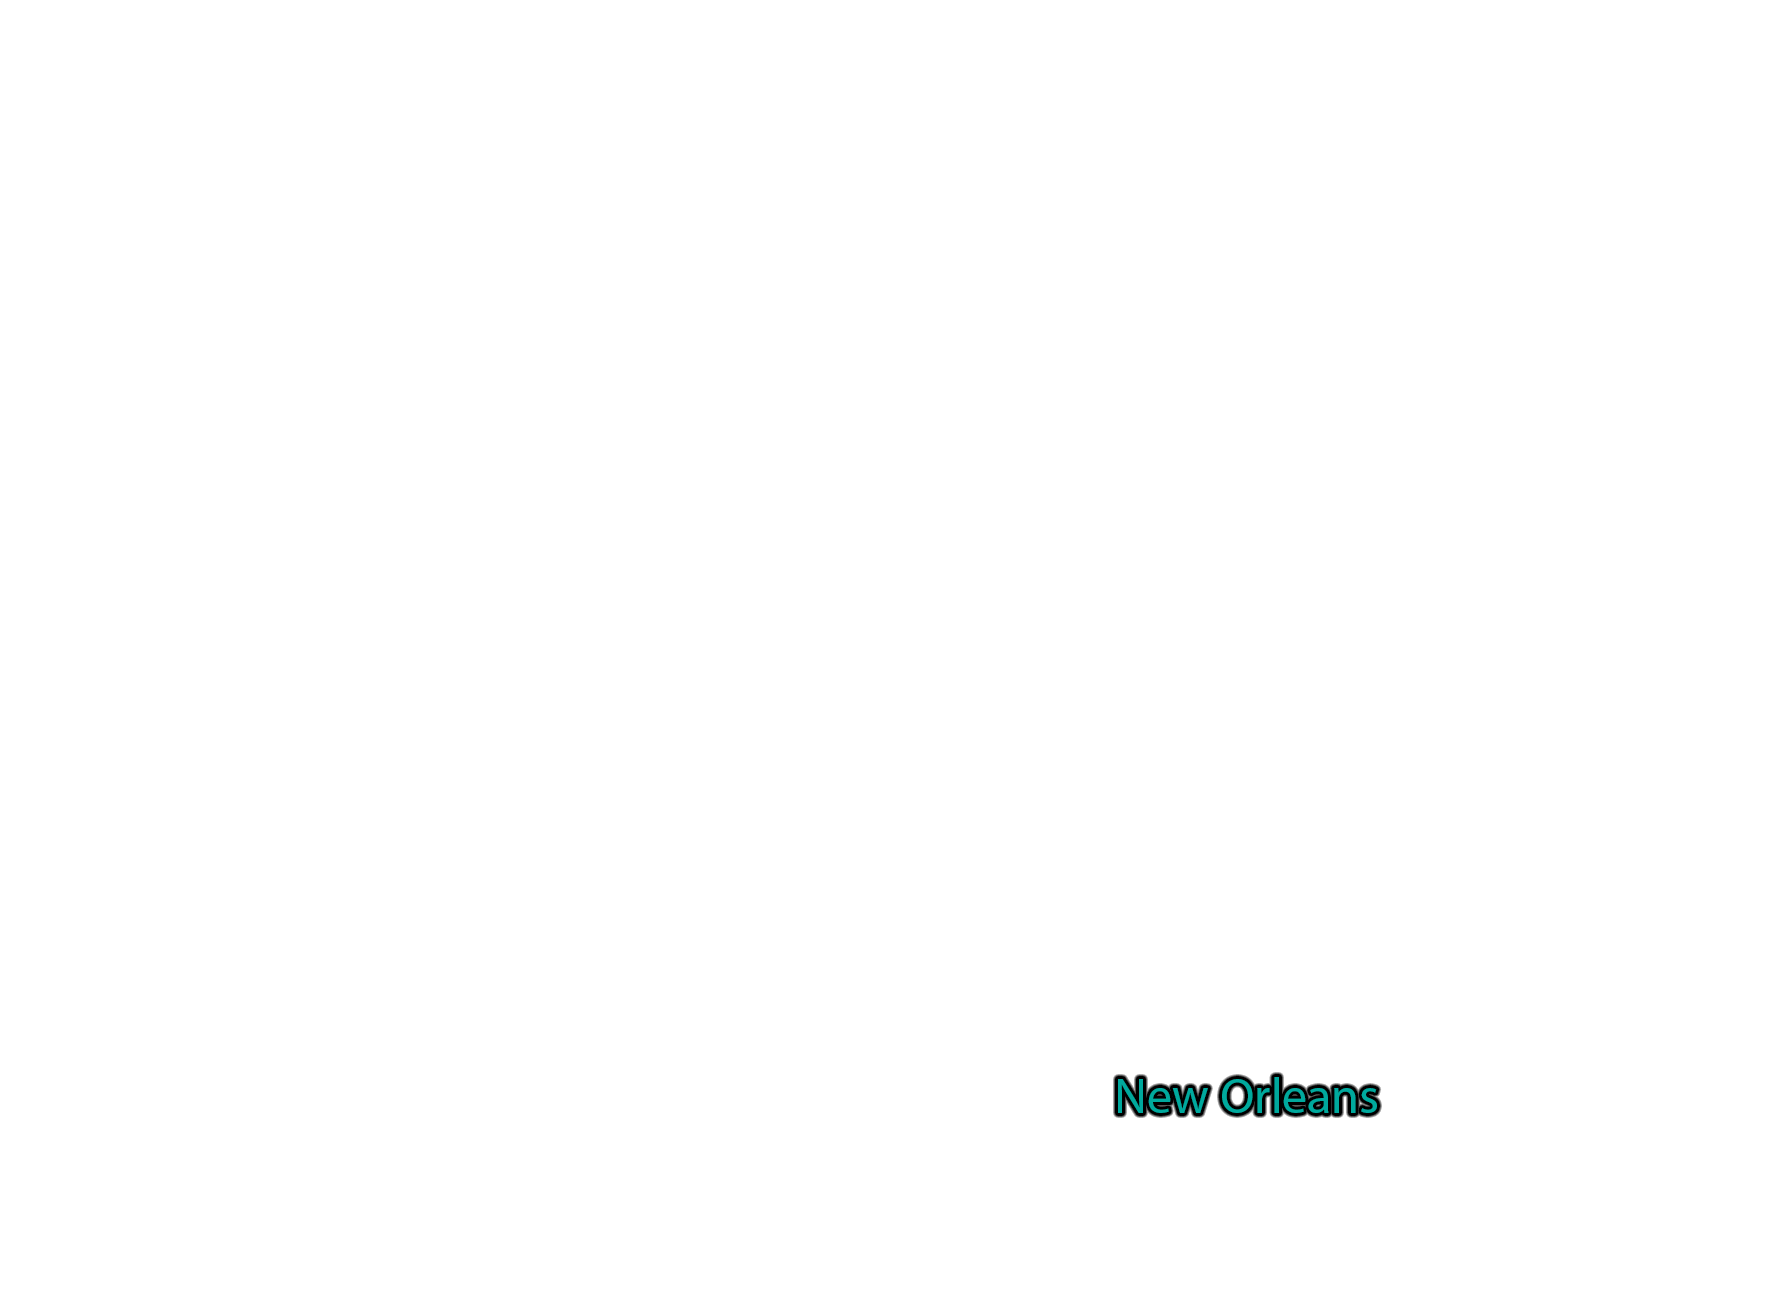 New-Orleans label with glow